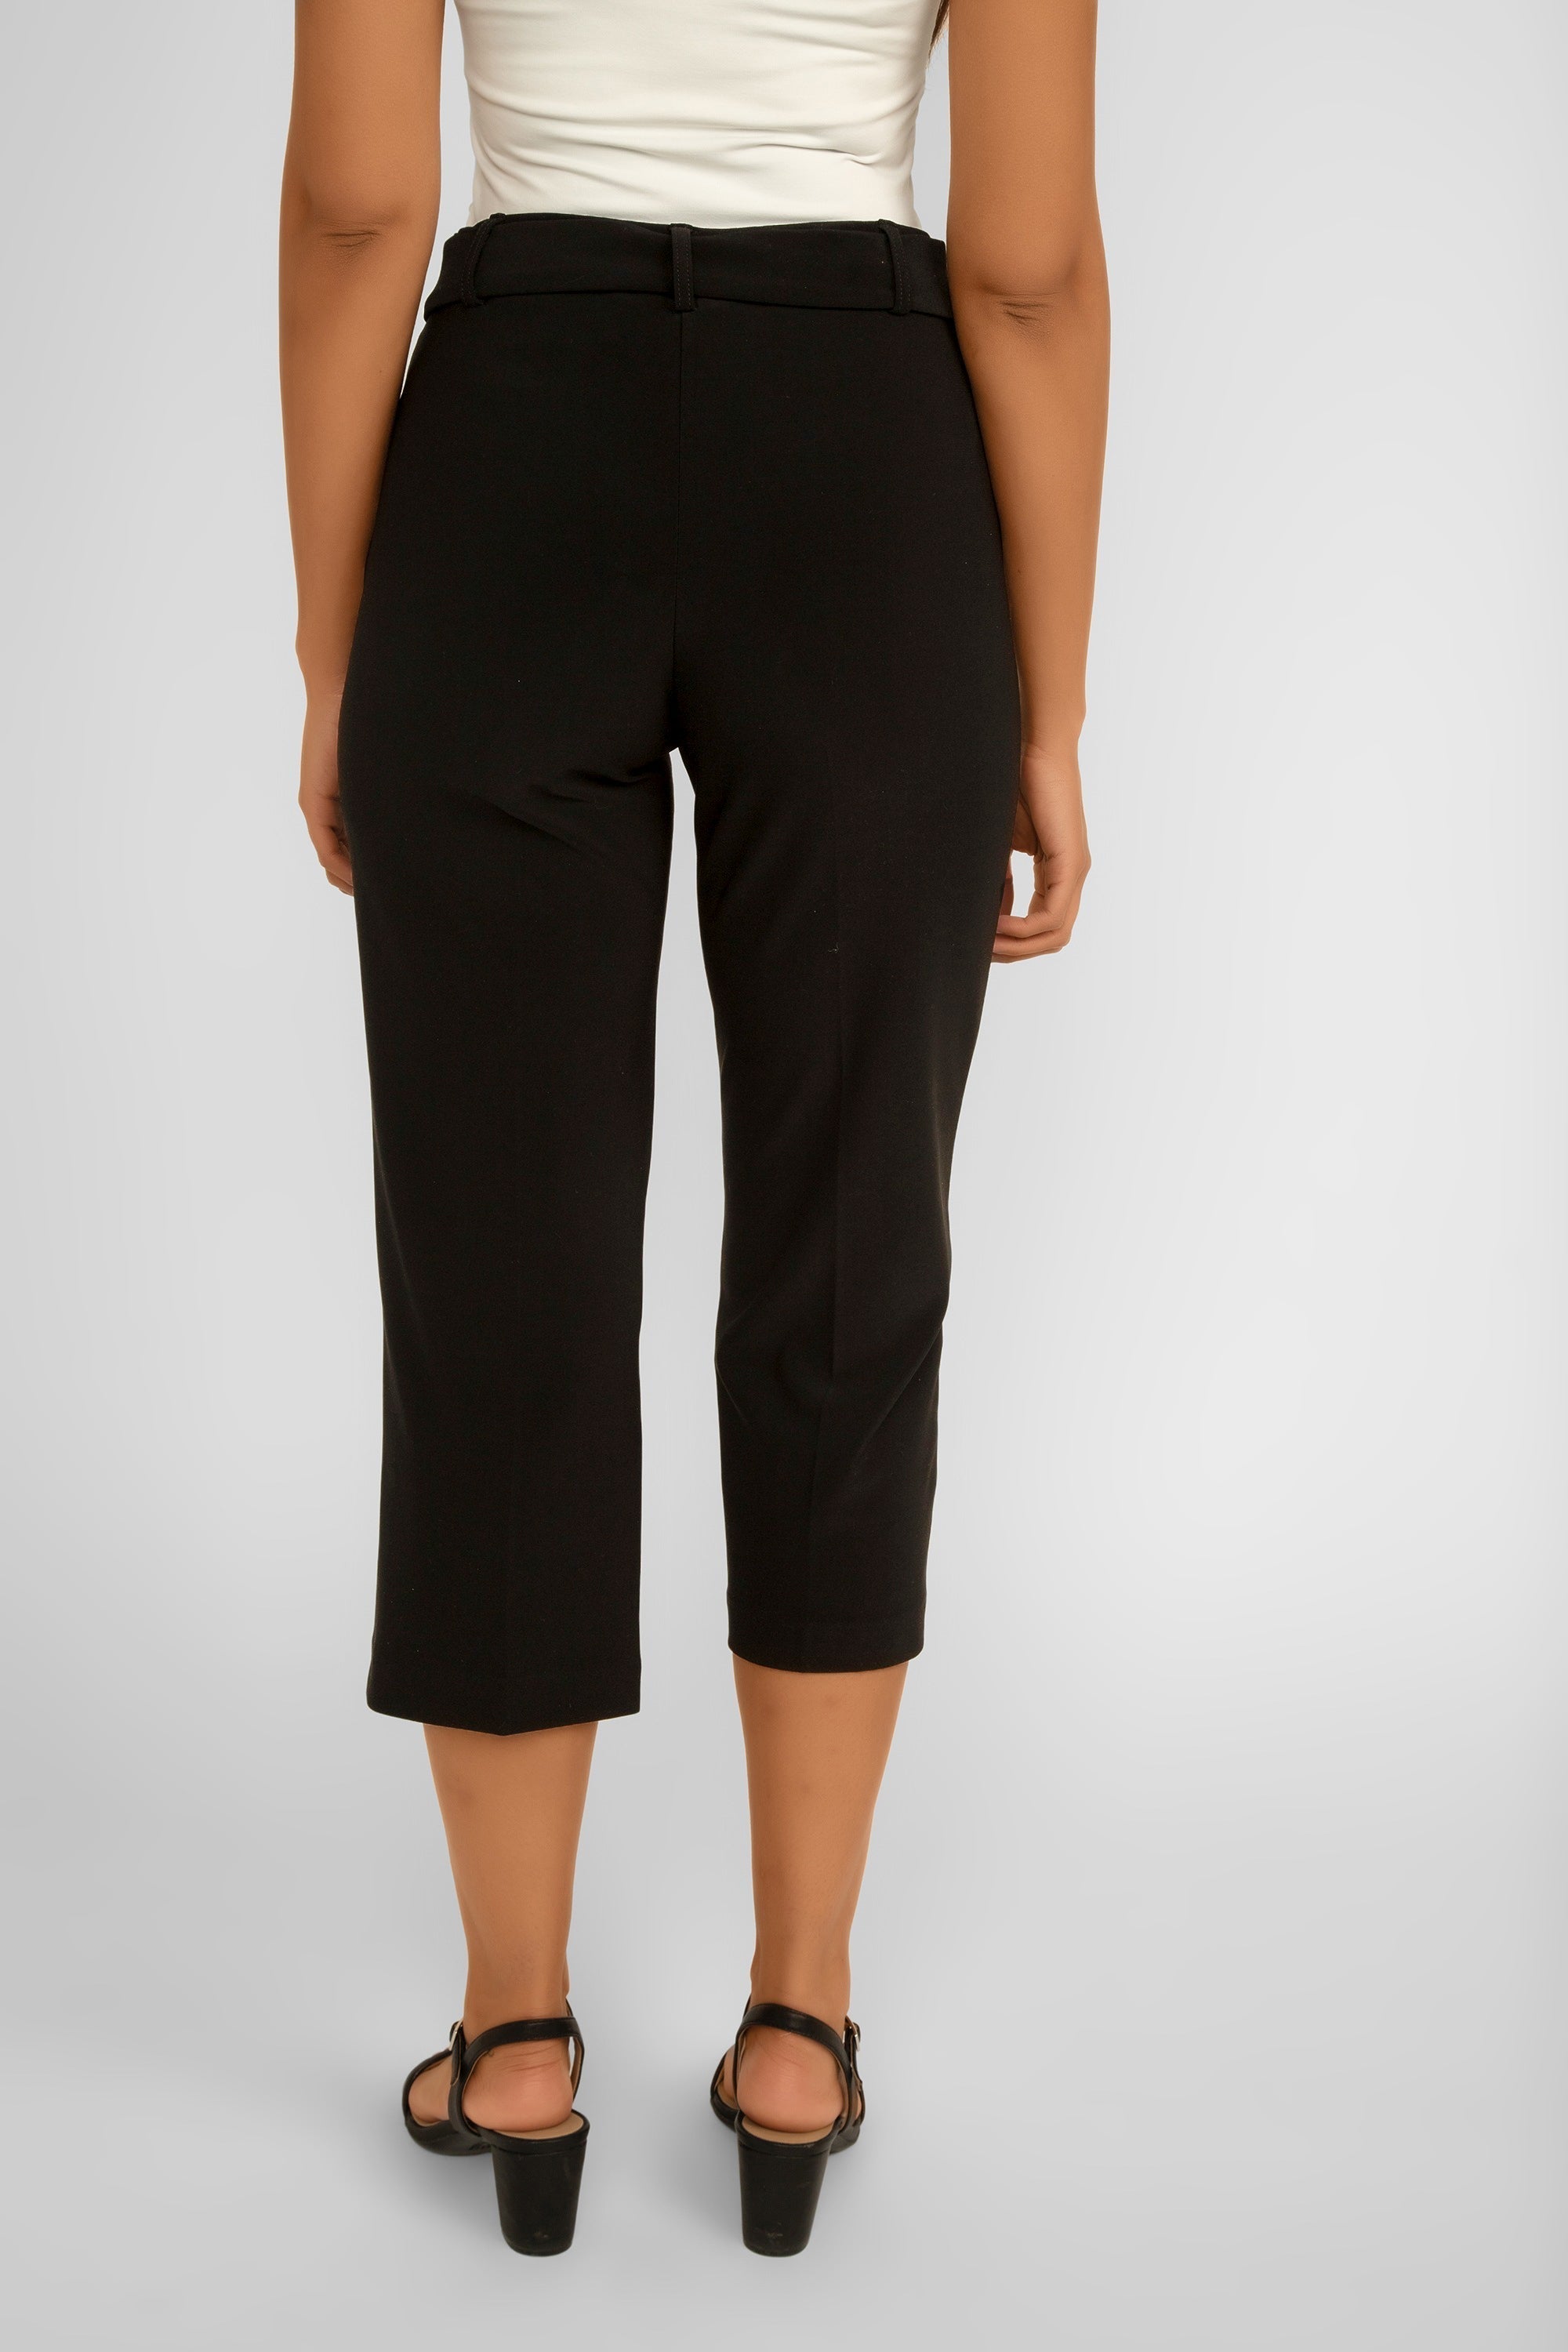 Joseph Ribkoff (241071) Women's Bonded Silky Knit, Cropped Pull On Culotte Pants in Black